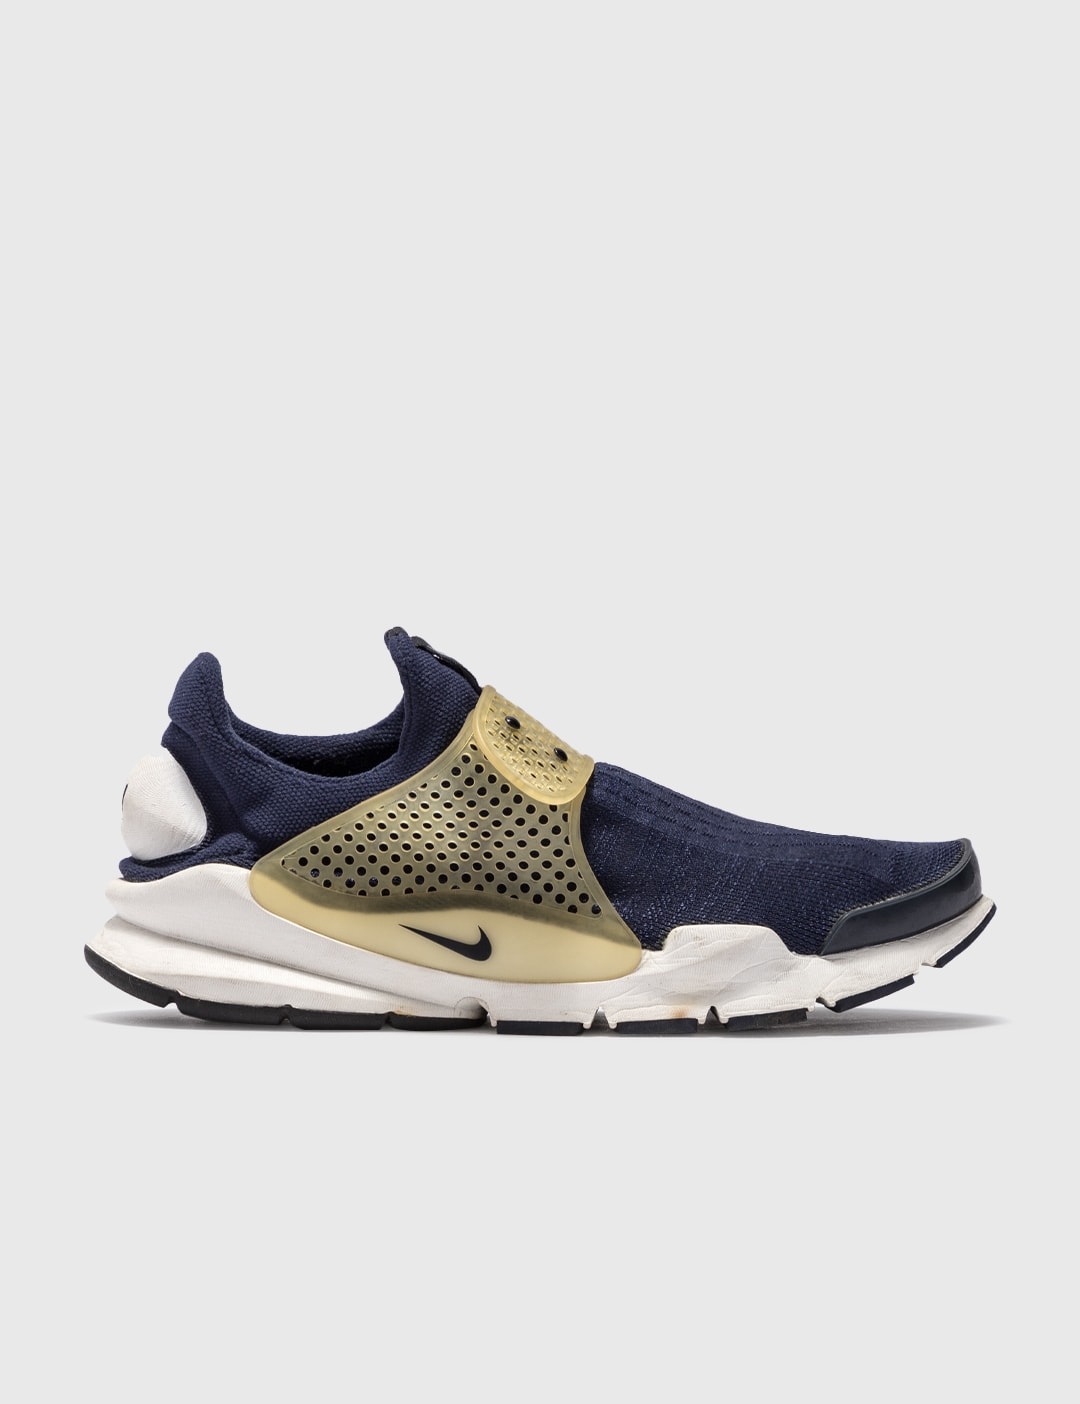 Nike - Fragment Design x Nike Sock Dart | HBX - Globally Curated Fashion  and Lifestyle by Hypebeast